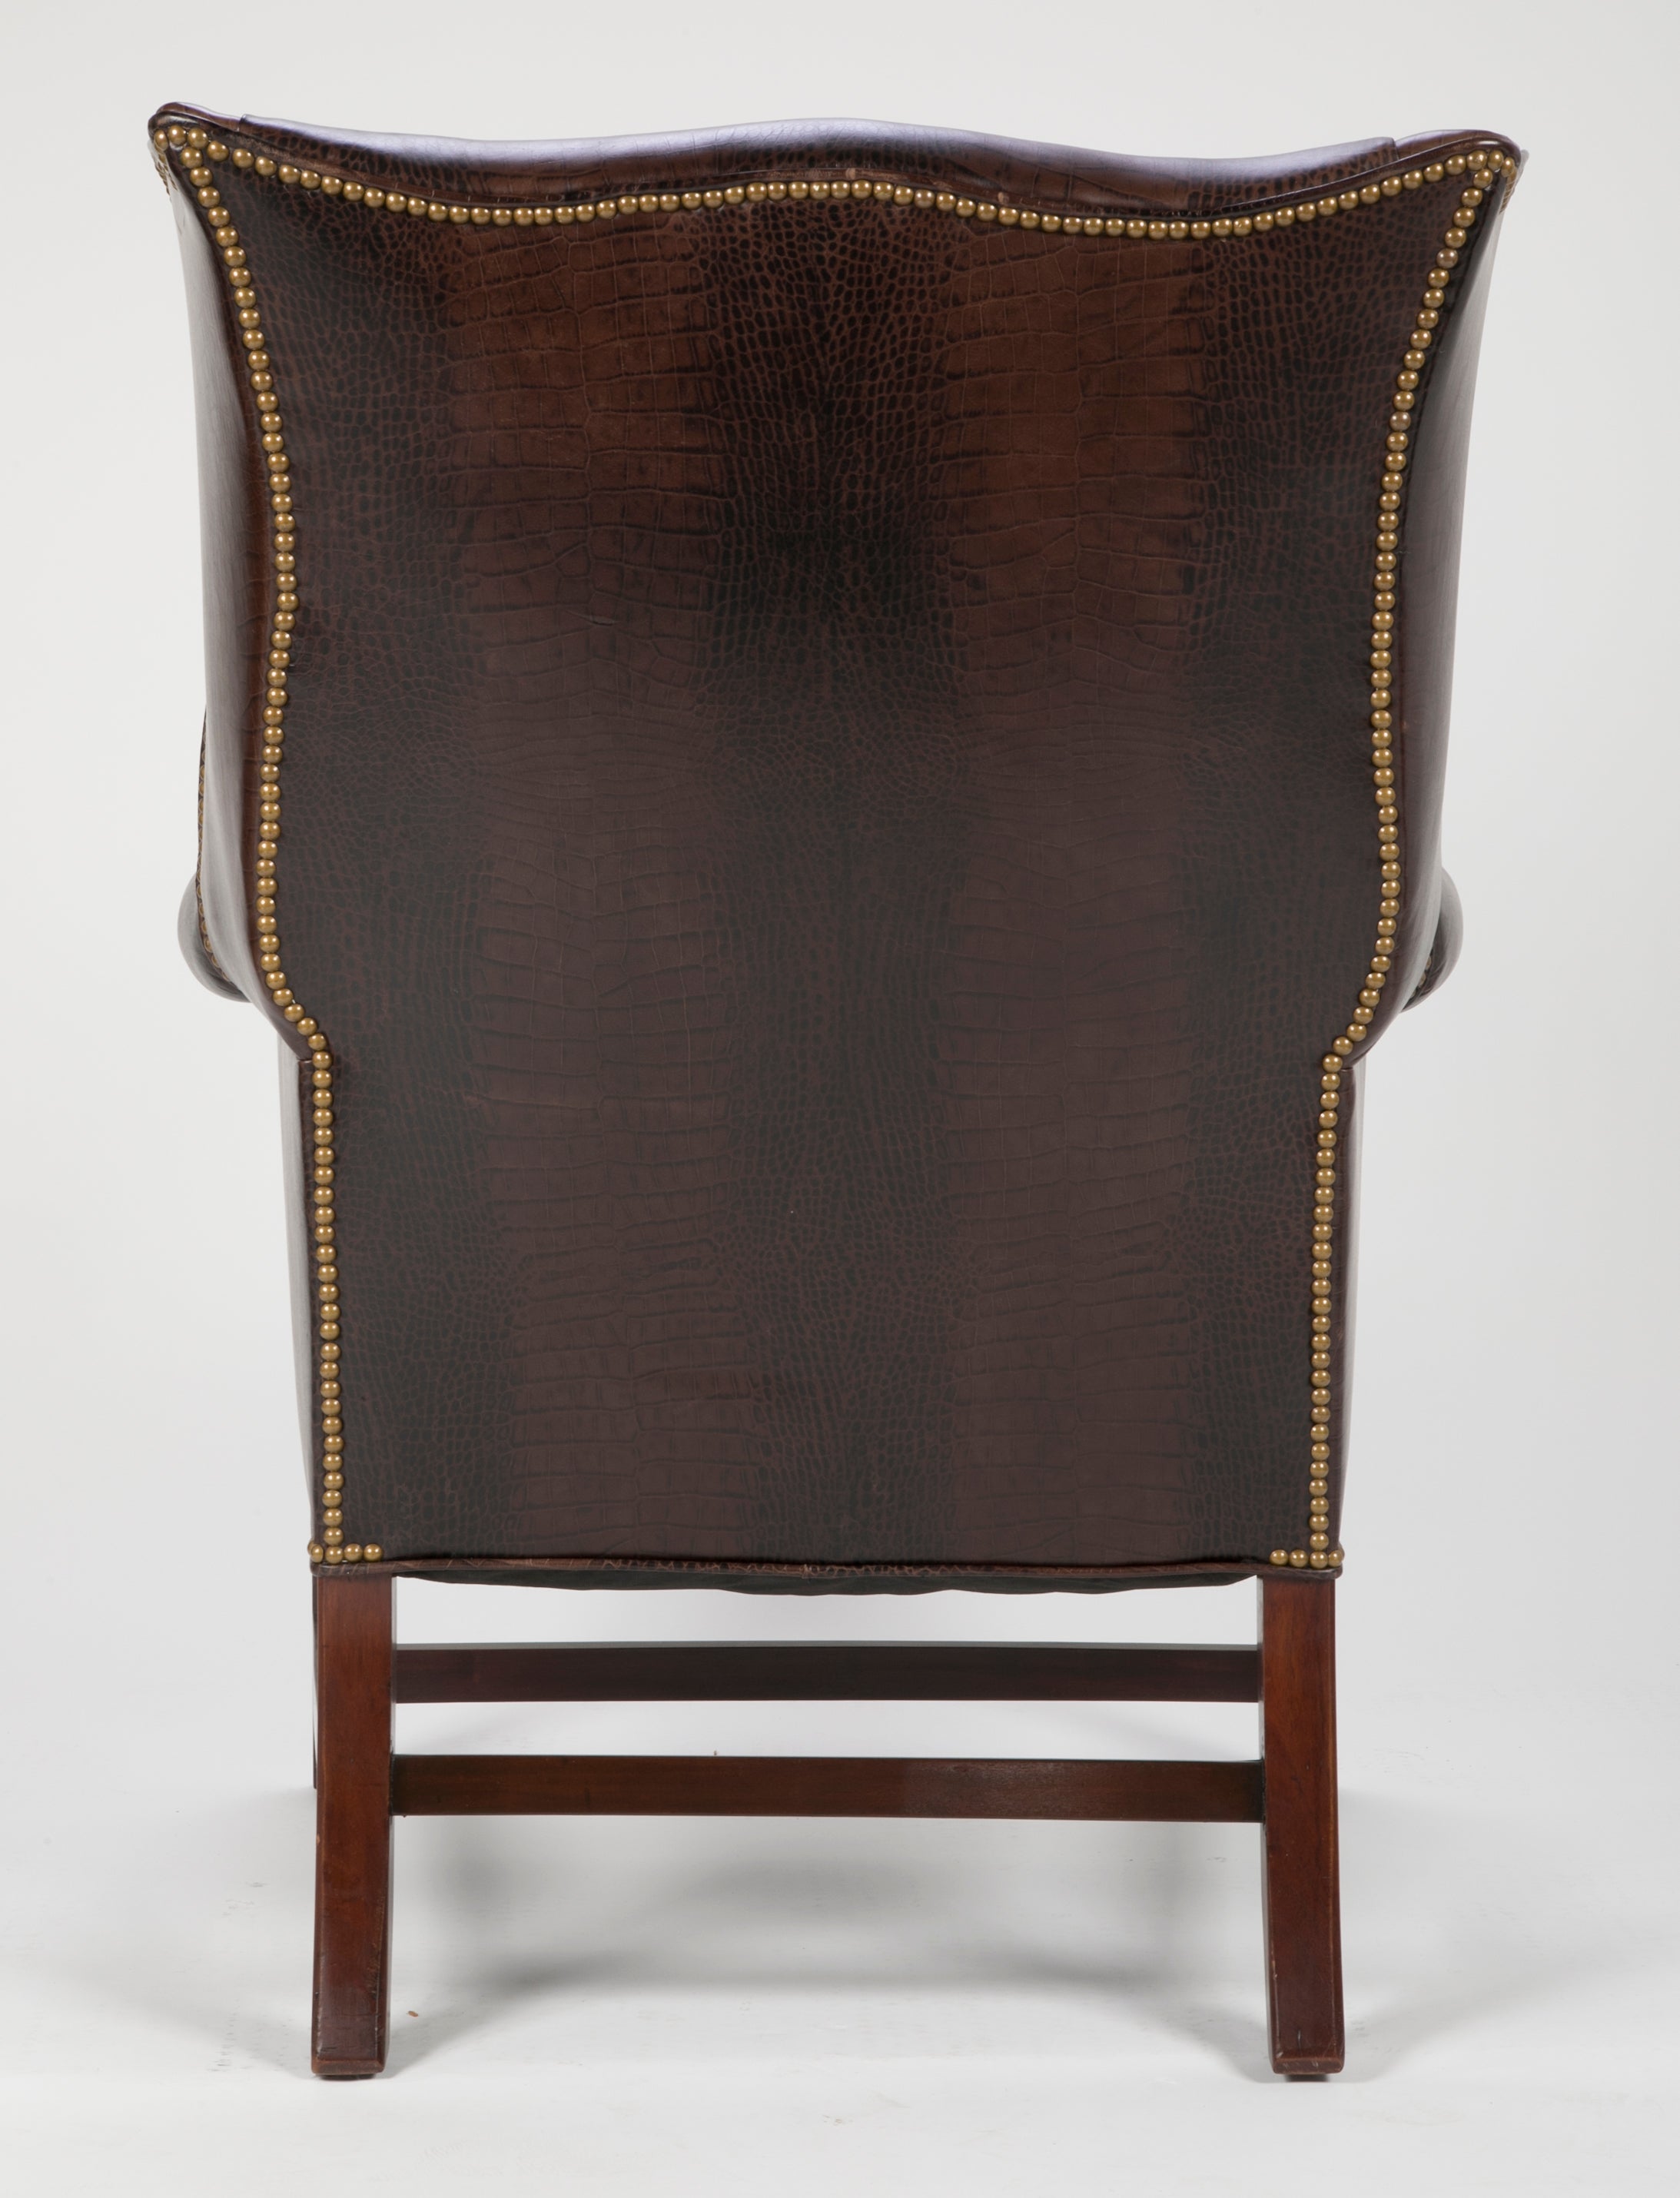 George III Mahogany Wing Chair with Leather Upholstery